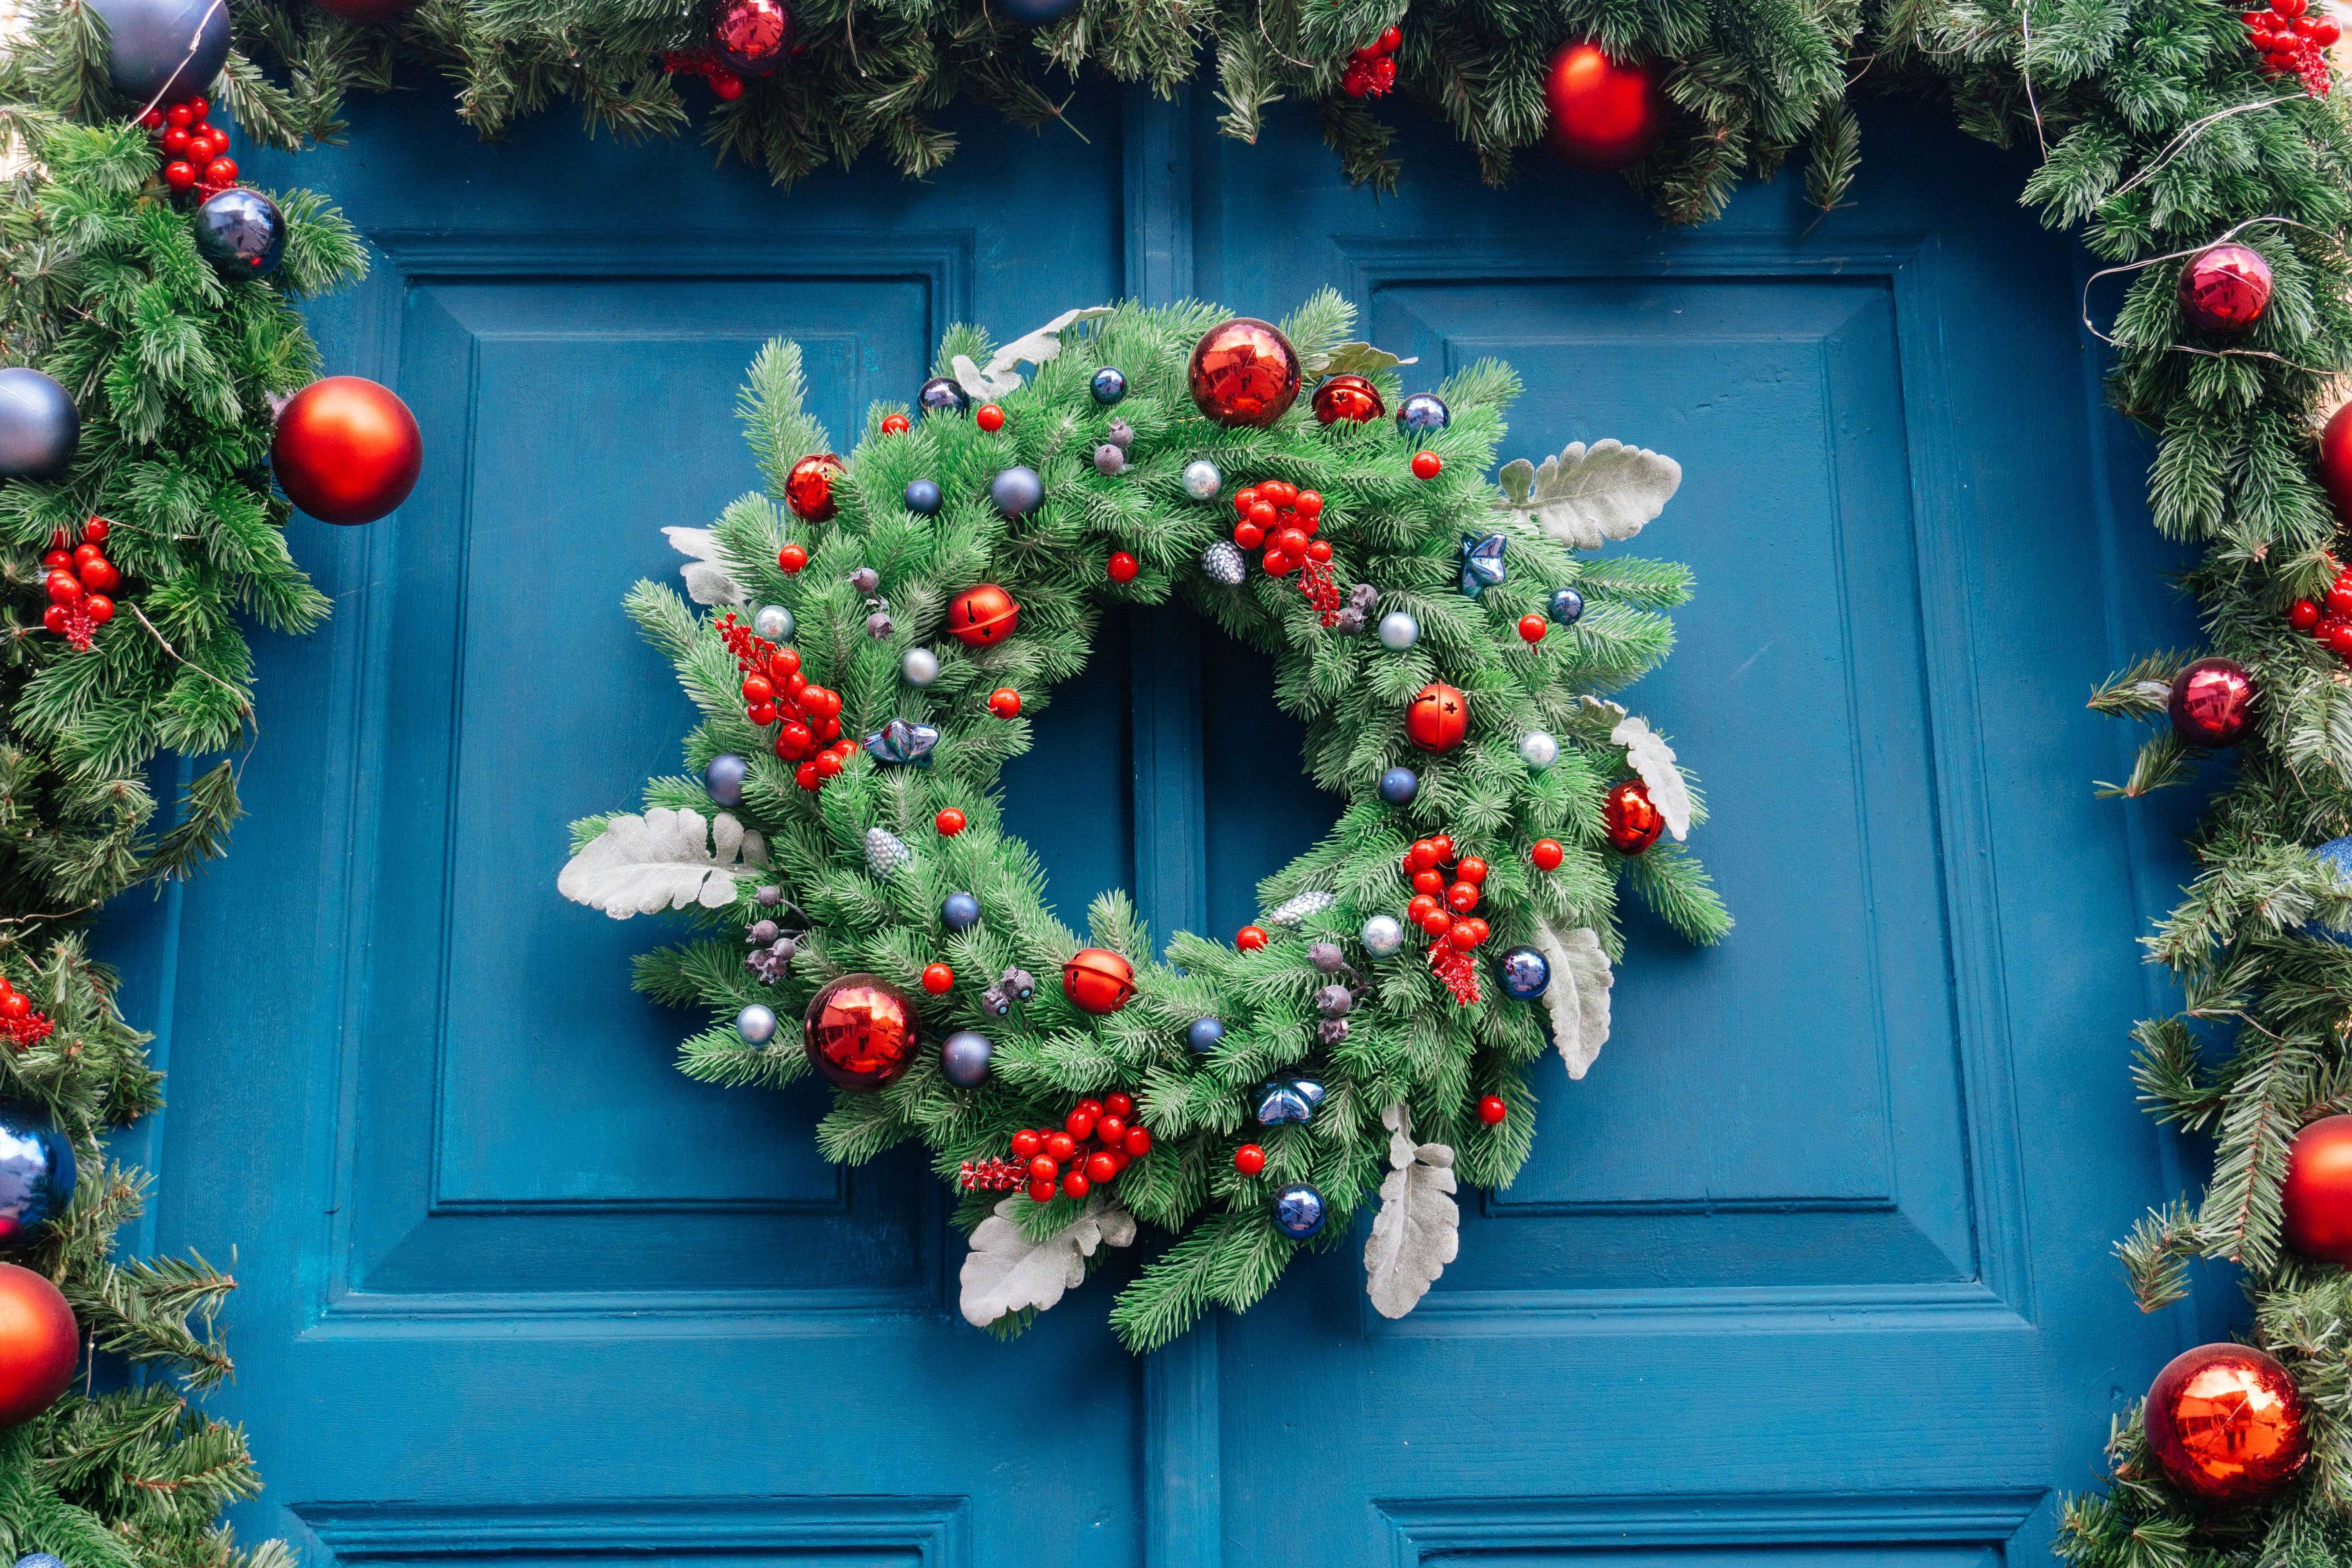 perfect holiday wreath and garland on a blue door